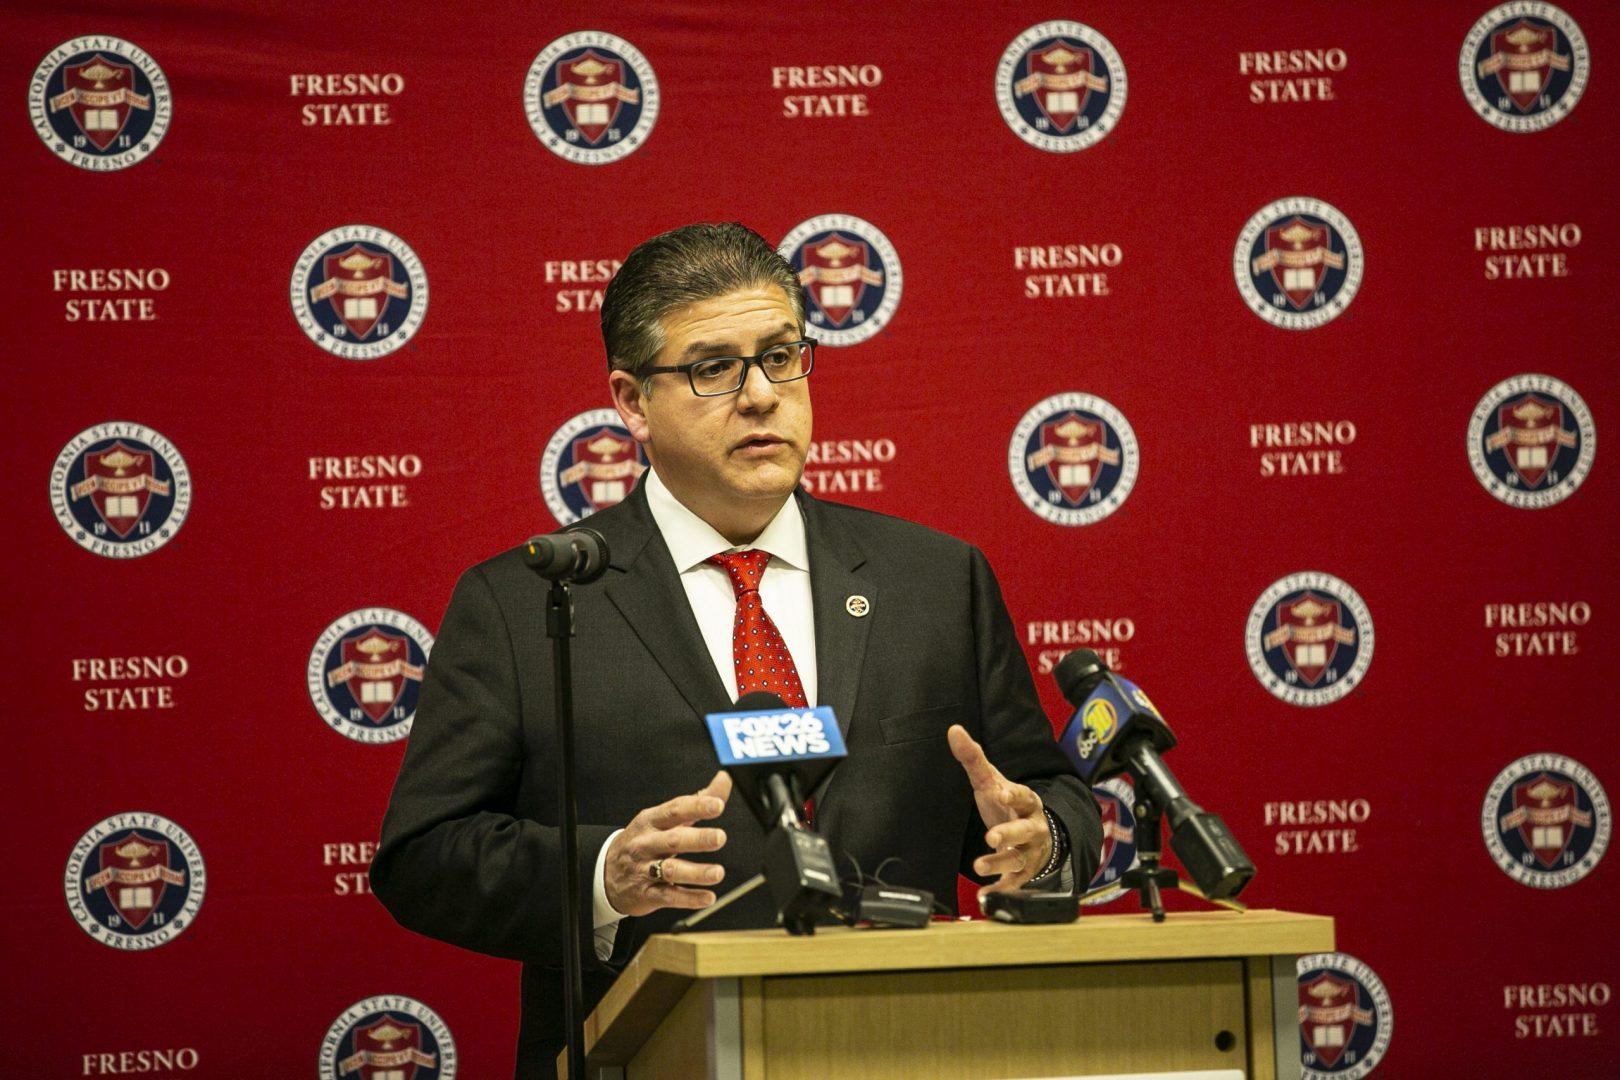 Fresno+State+President+Dr.+Joseph+Castro+speaking+at+a+press+conference+on+March+12%2C+2020.+%28Larry+Valenzuela%2FThe+Collegian%29